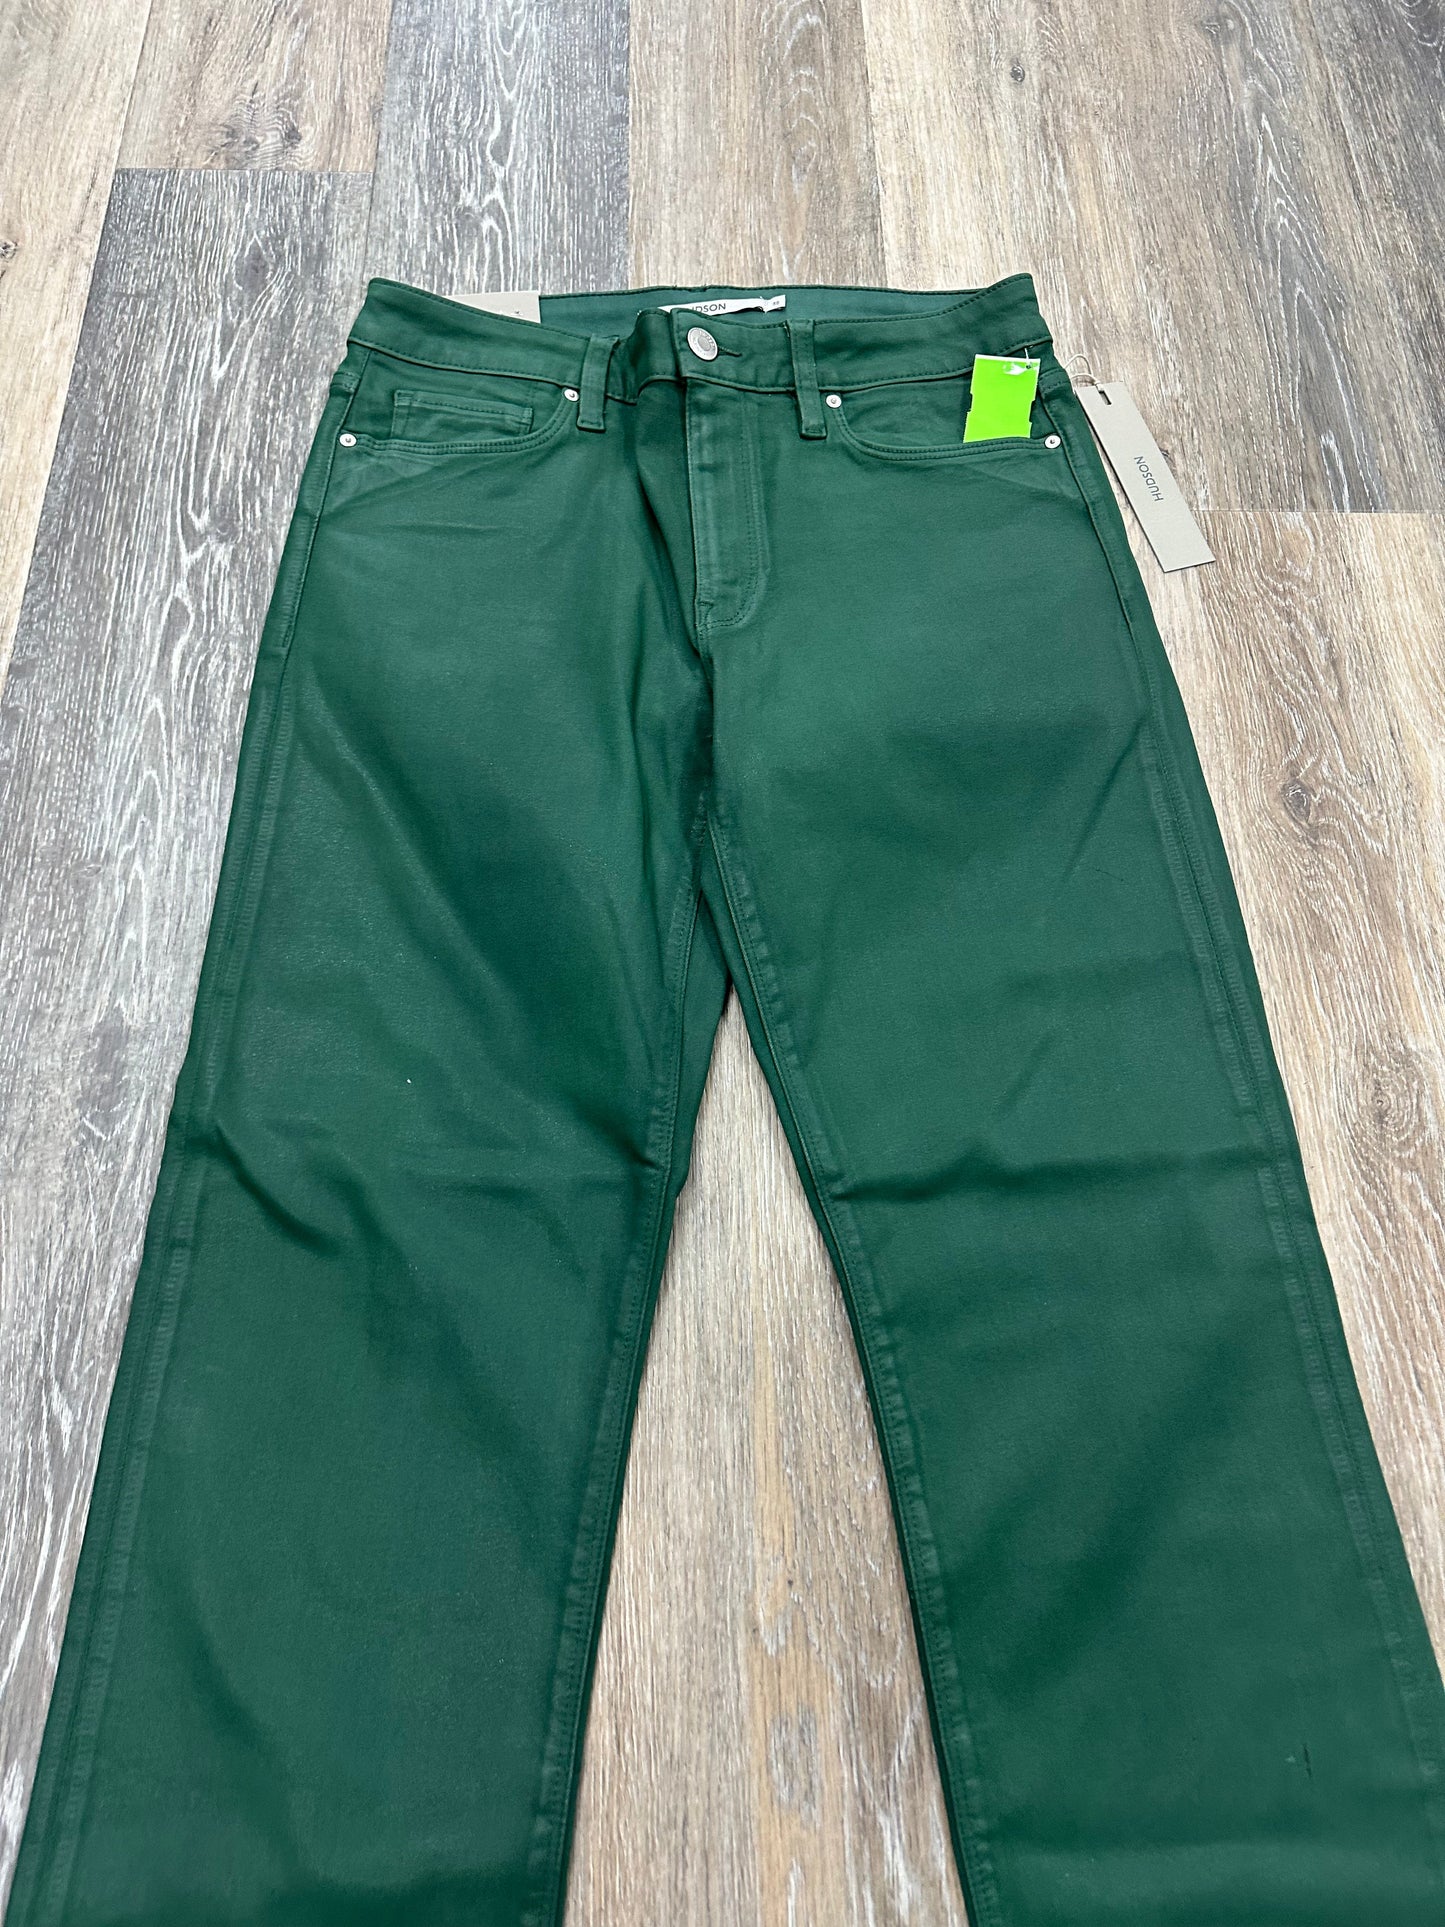 Jeans Relaxed/boyfriend By Hudson  Size: 10